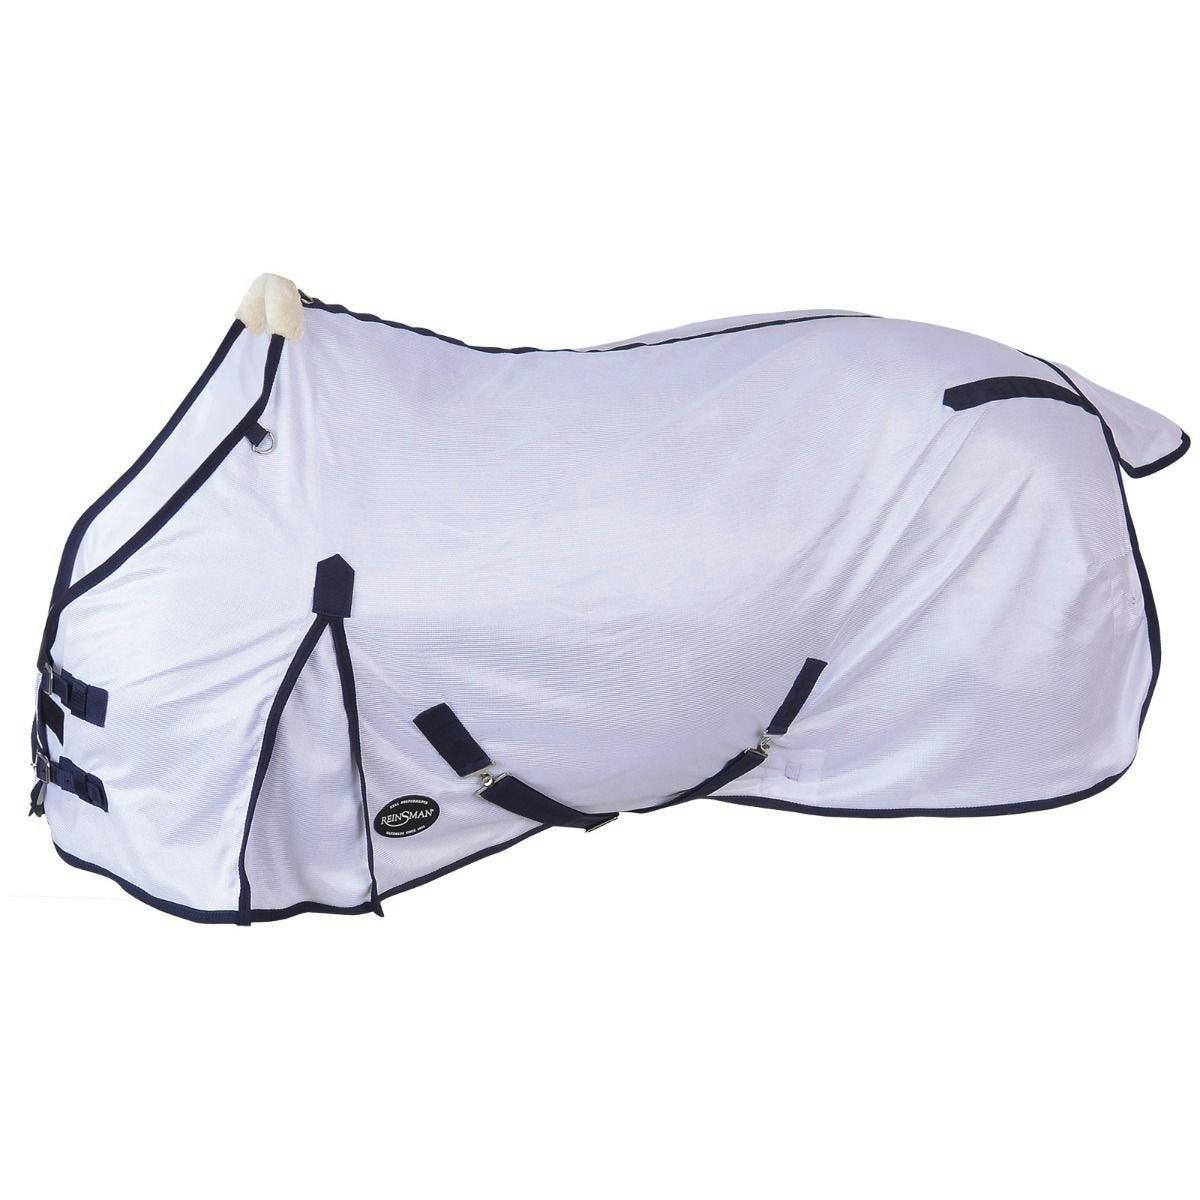 Breathable Mesh Fly Sheet